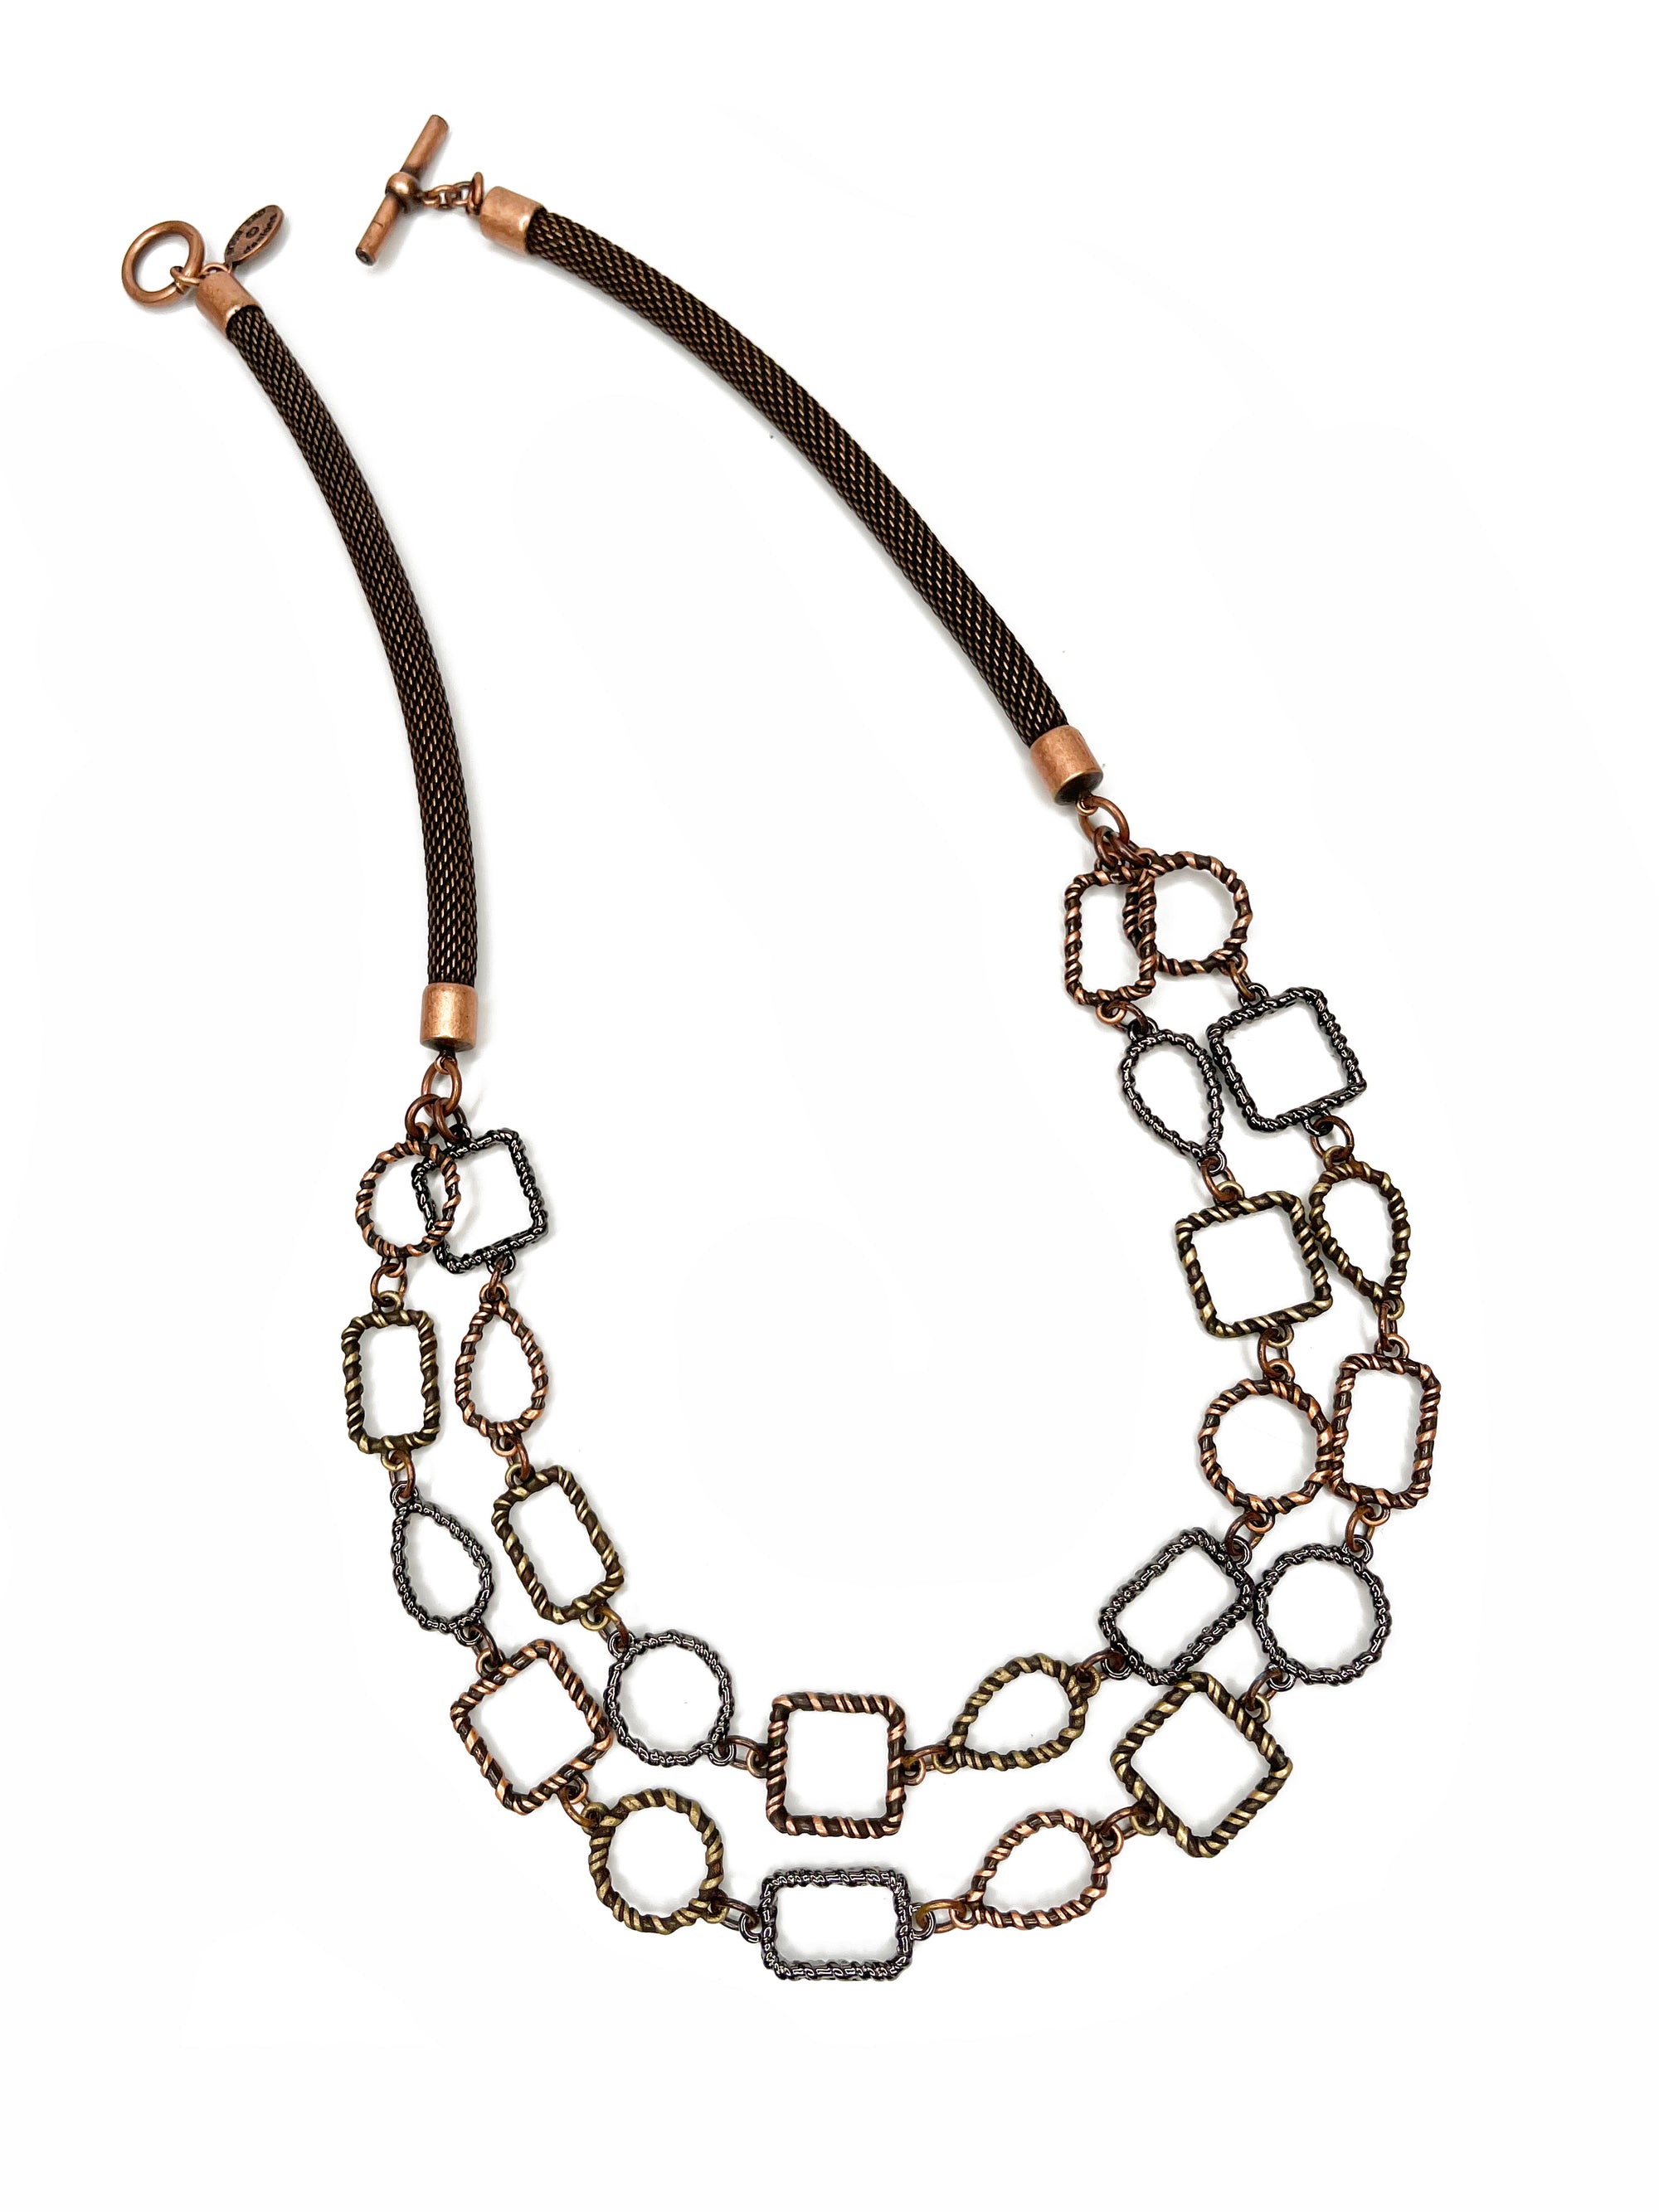 Mesh Necklace with 2-Strands of Geo Shapes